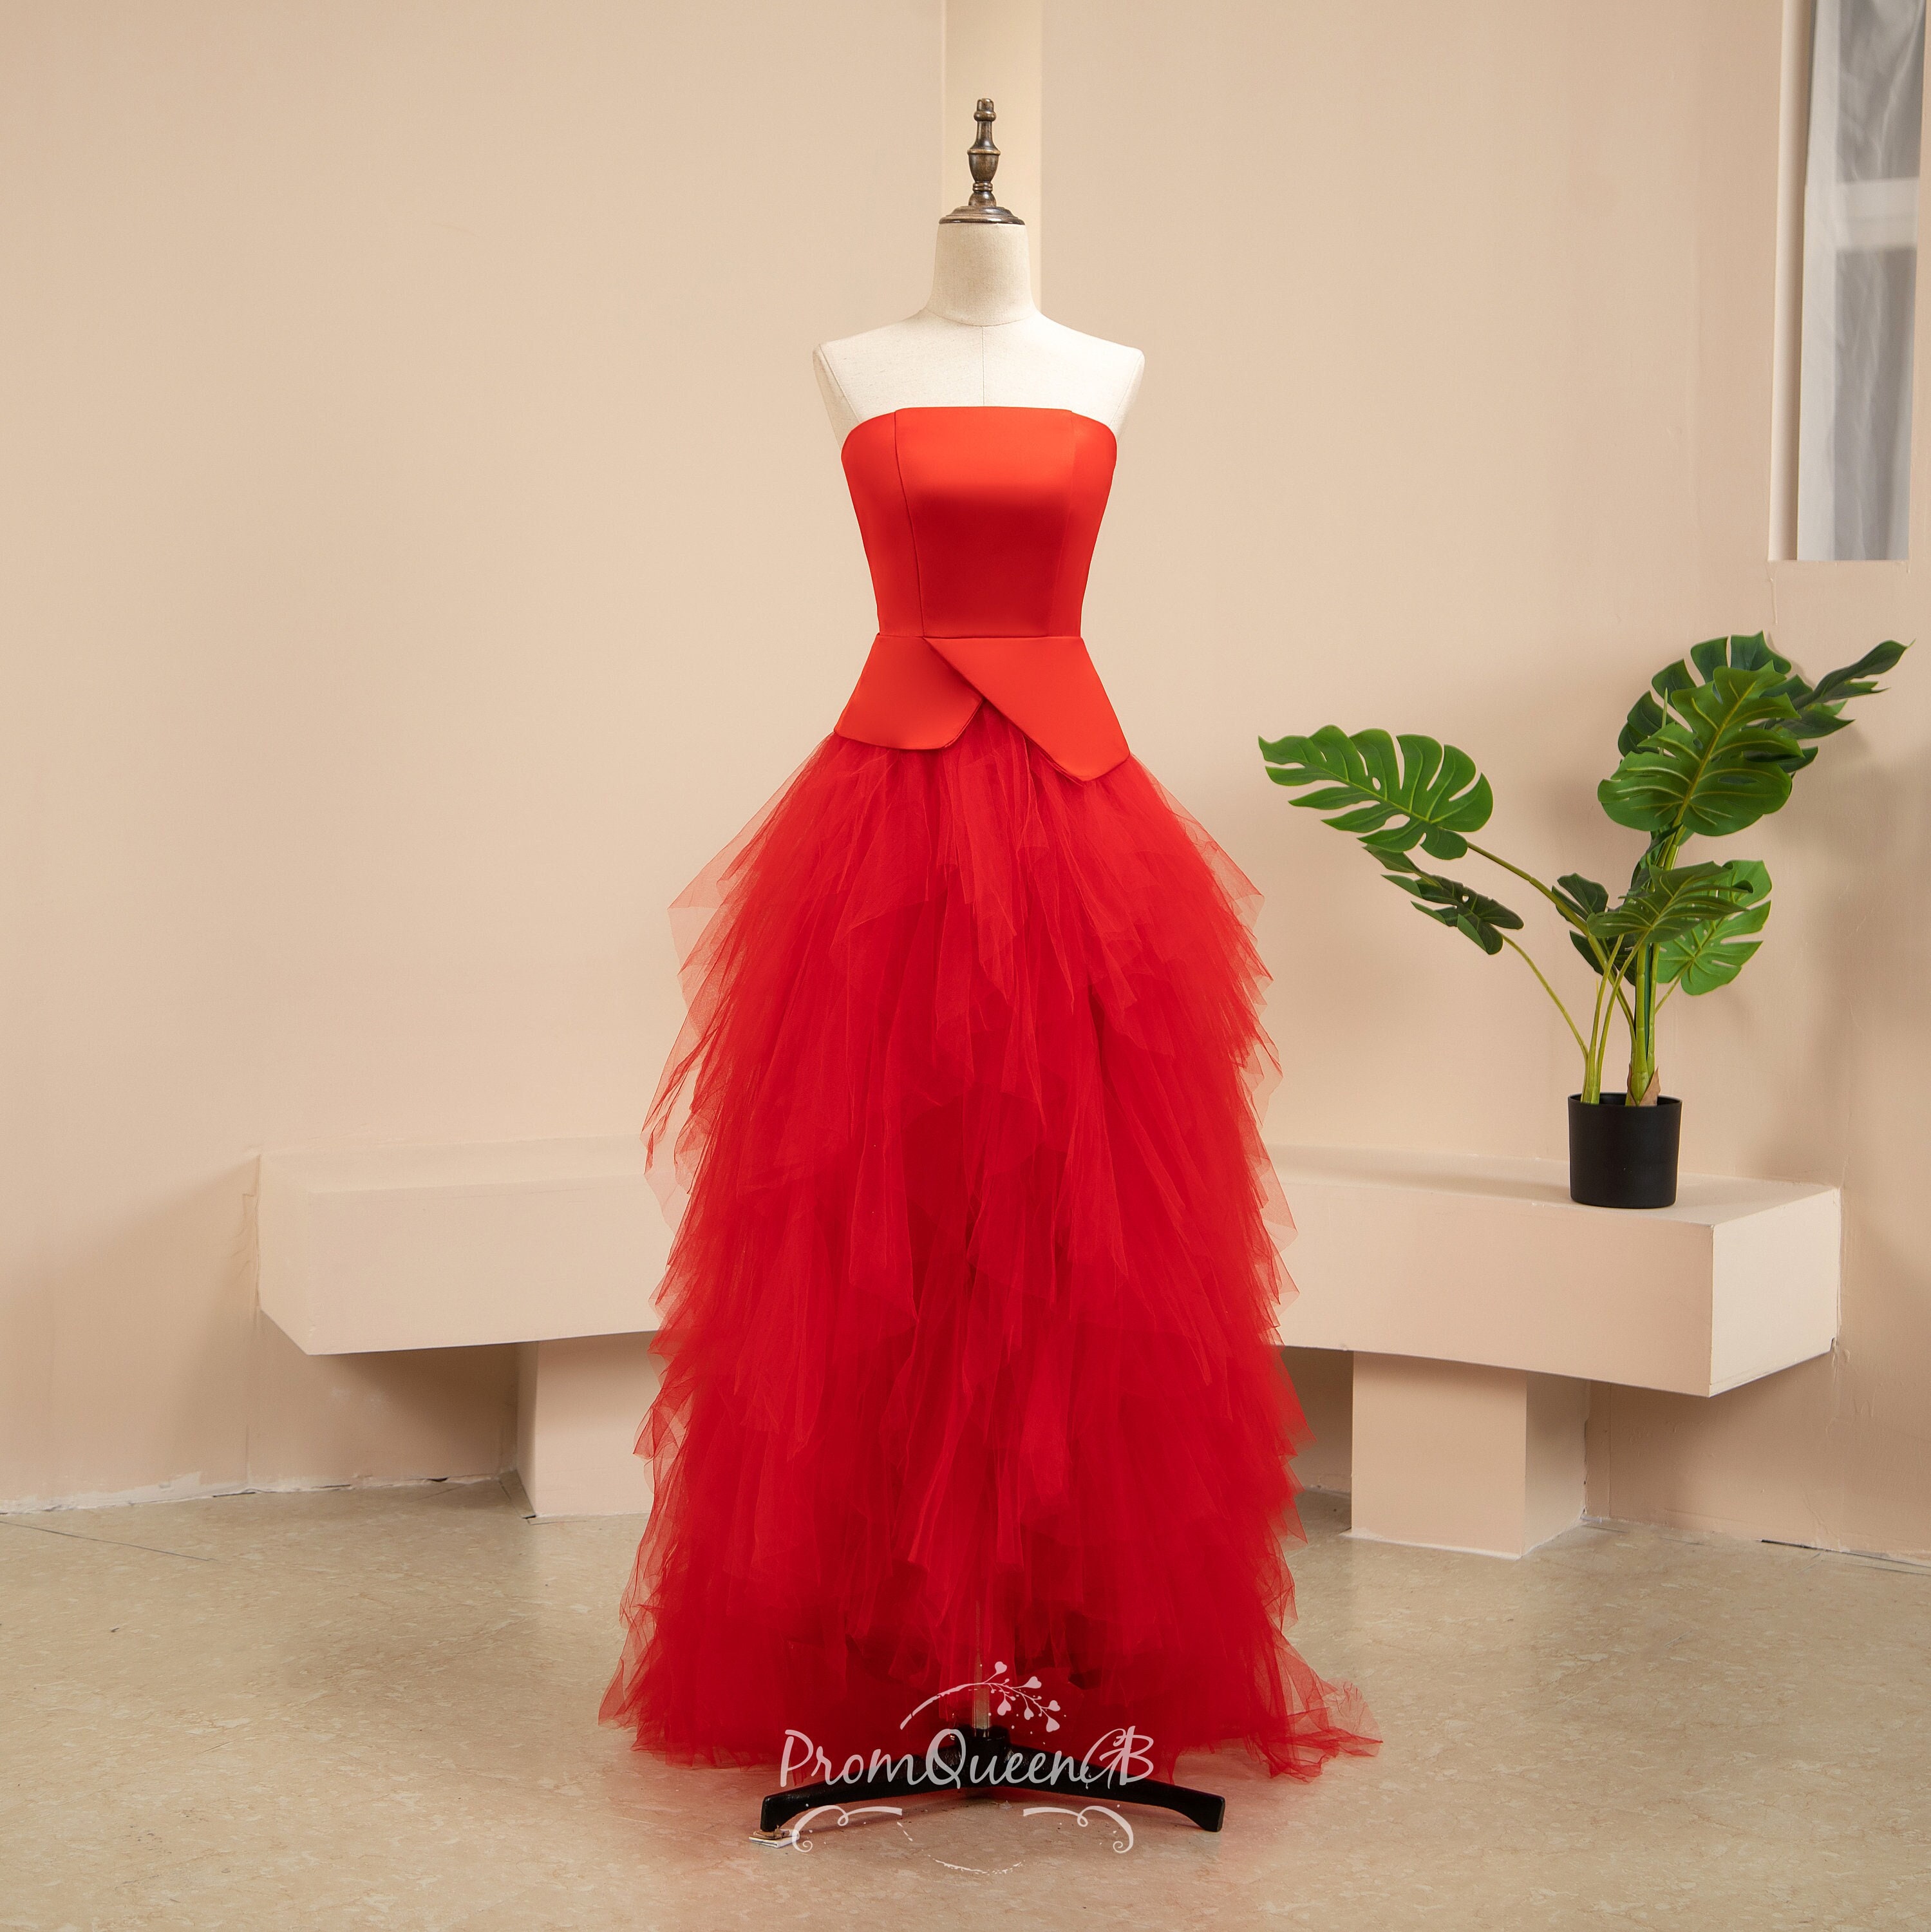 Tulle Dress Women, Tulle Tiered Dress, Tulle Prom Dress, Evening